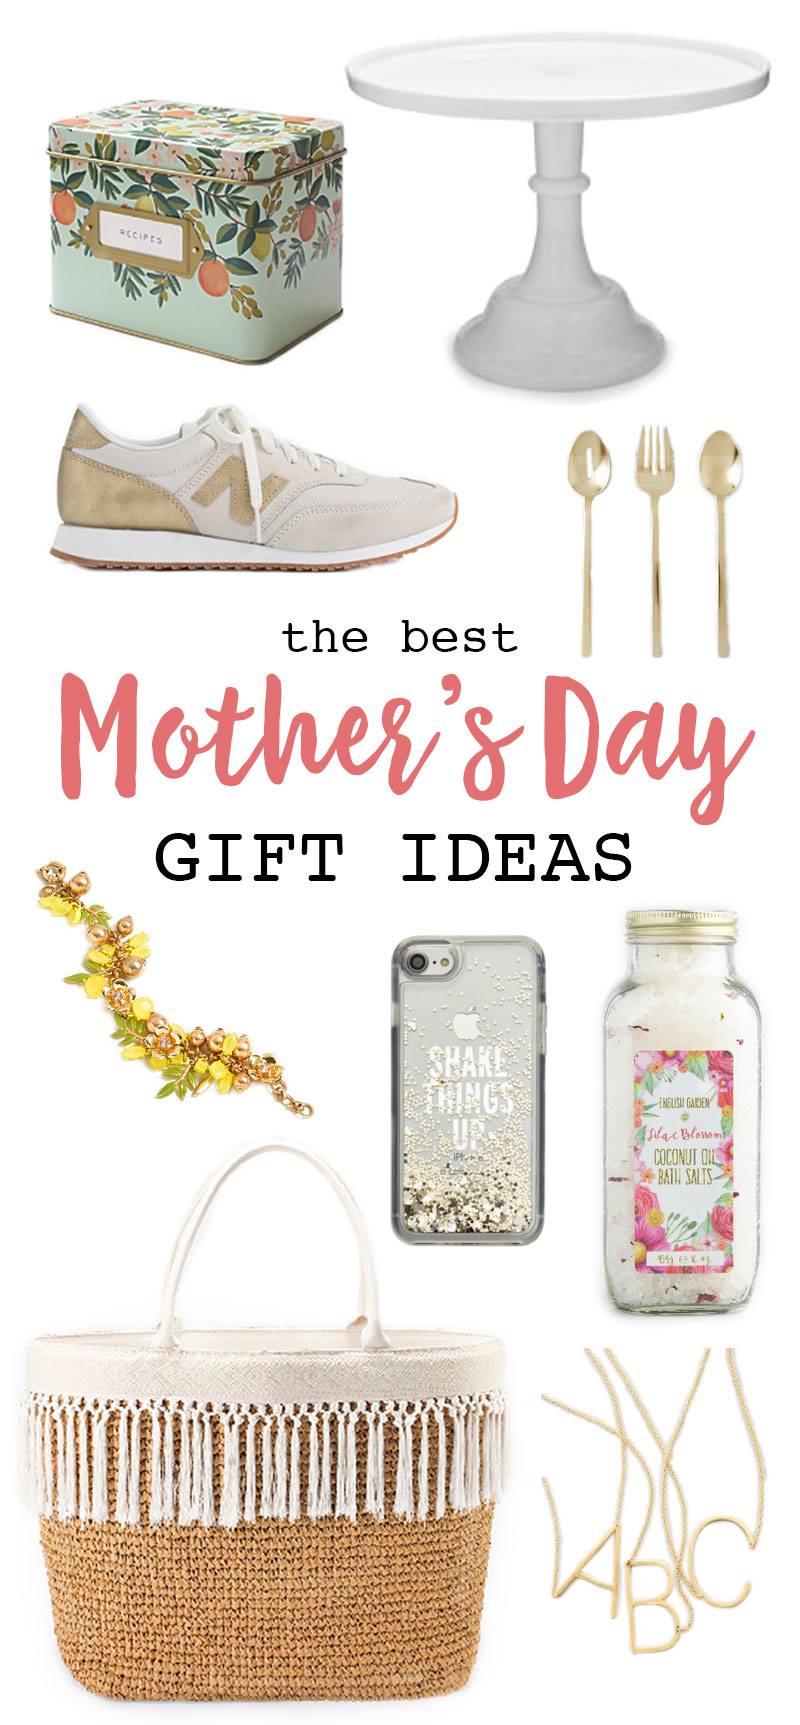 The Best Mother's Day Gift Ideas by Lindi Haws of Love The Day